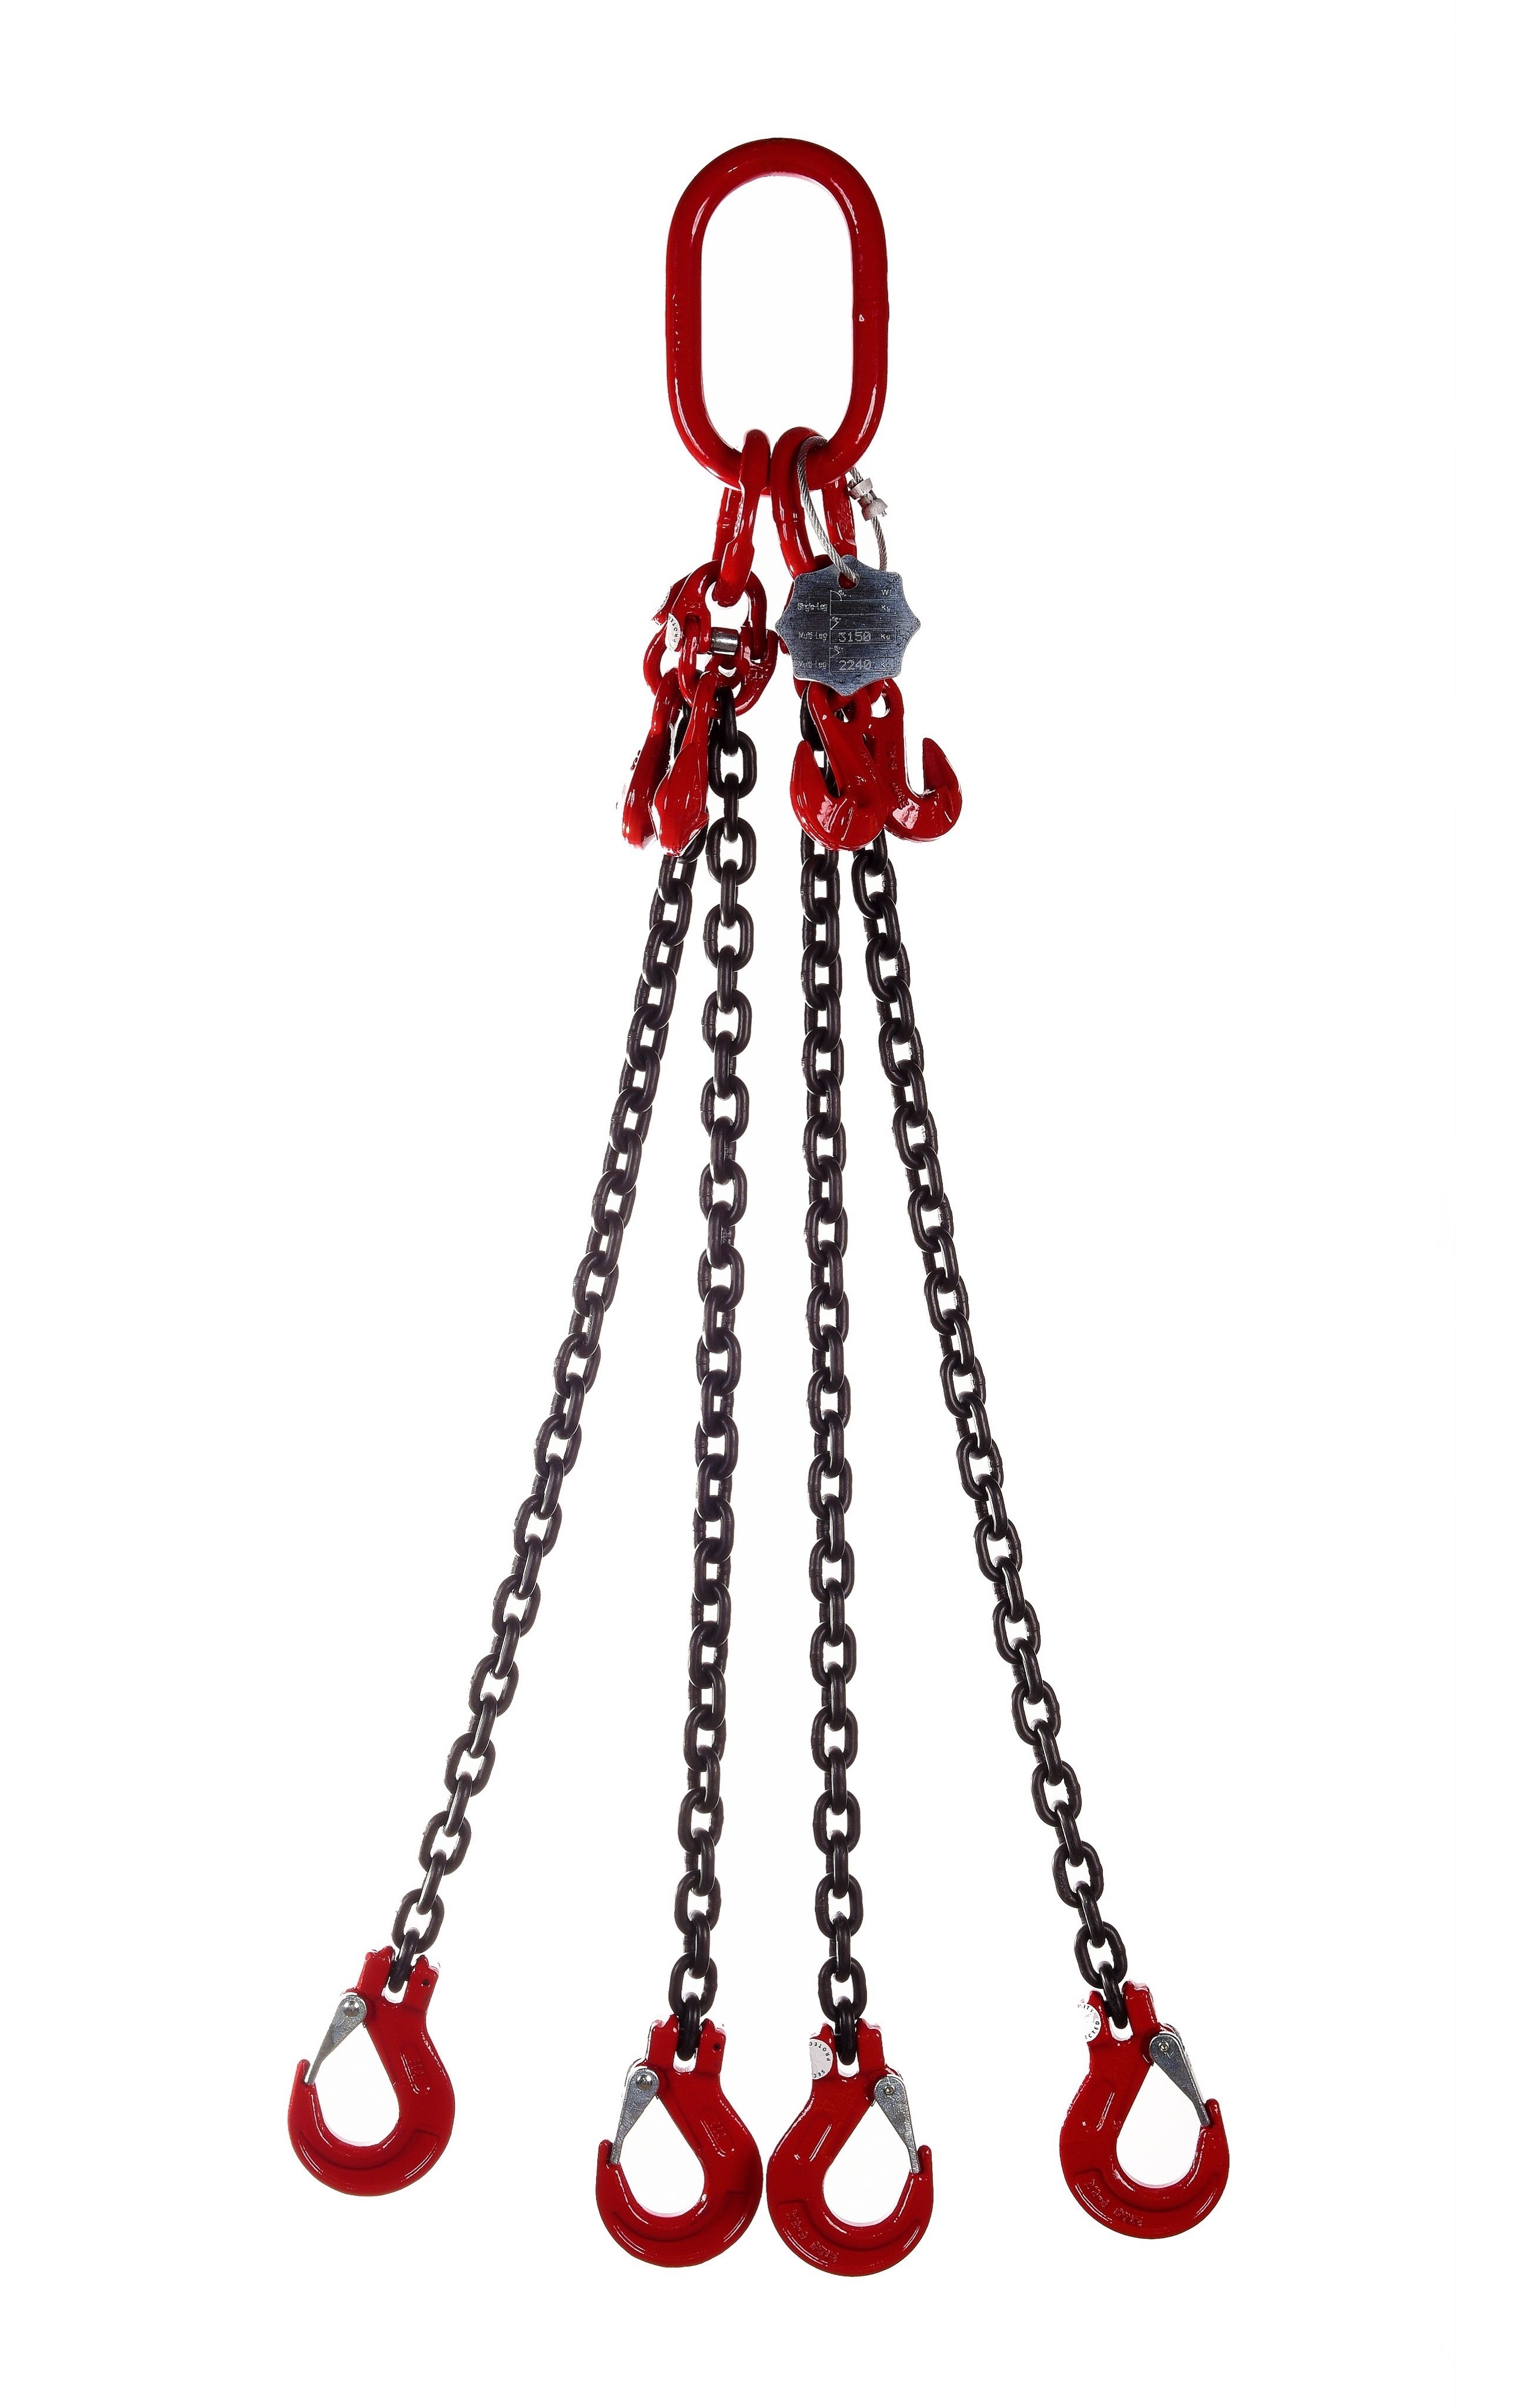 4 Leg 26.5tonne 20mm Lifting Chain Sling with choice of length and hooks – Without Shortening Hook – 7mtr – Clevis Safety Hook – Chain Slings – WSB